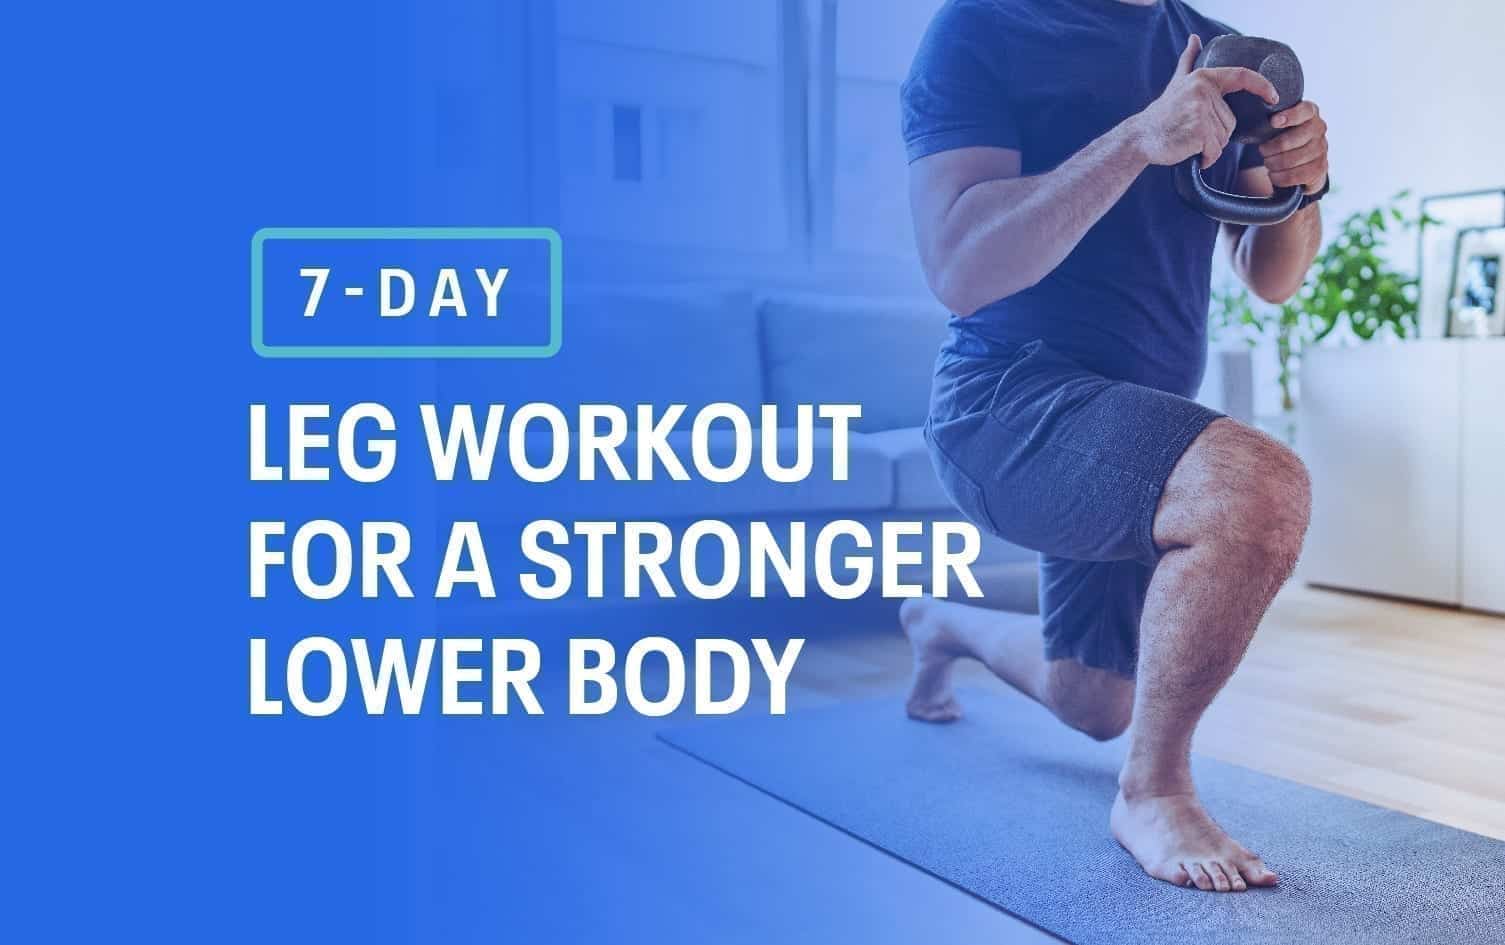 7-Day Leg Workout For a Stronger Lower Body, Fitness